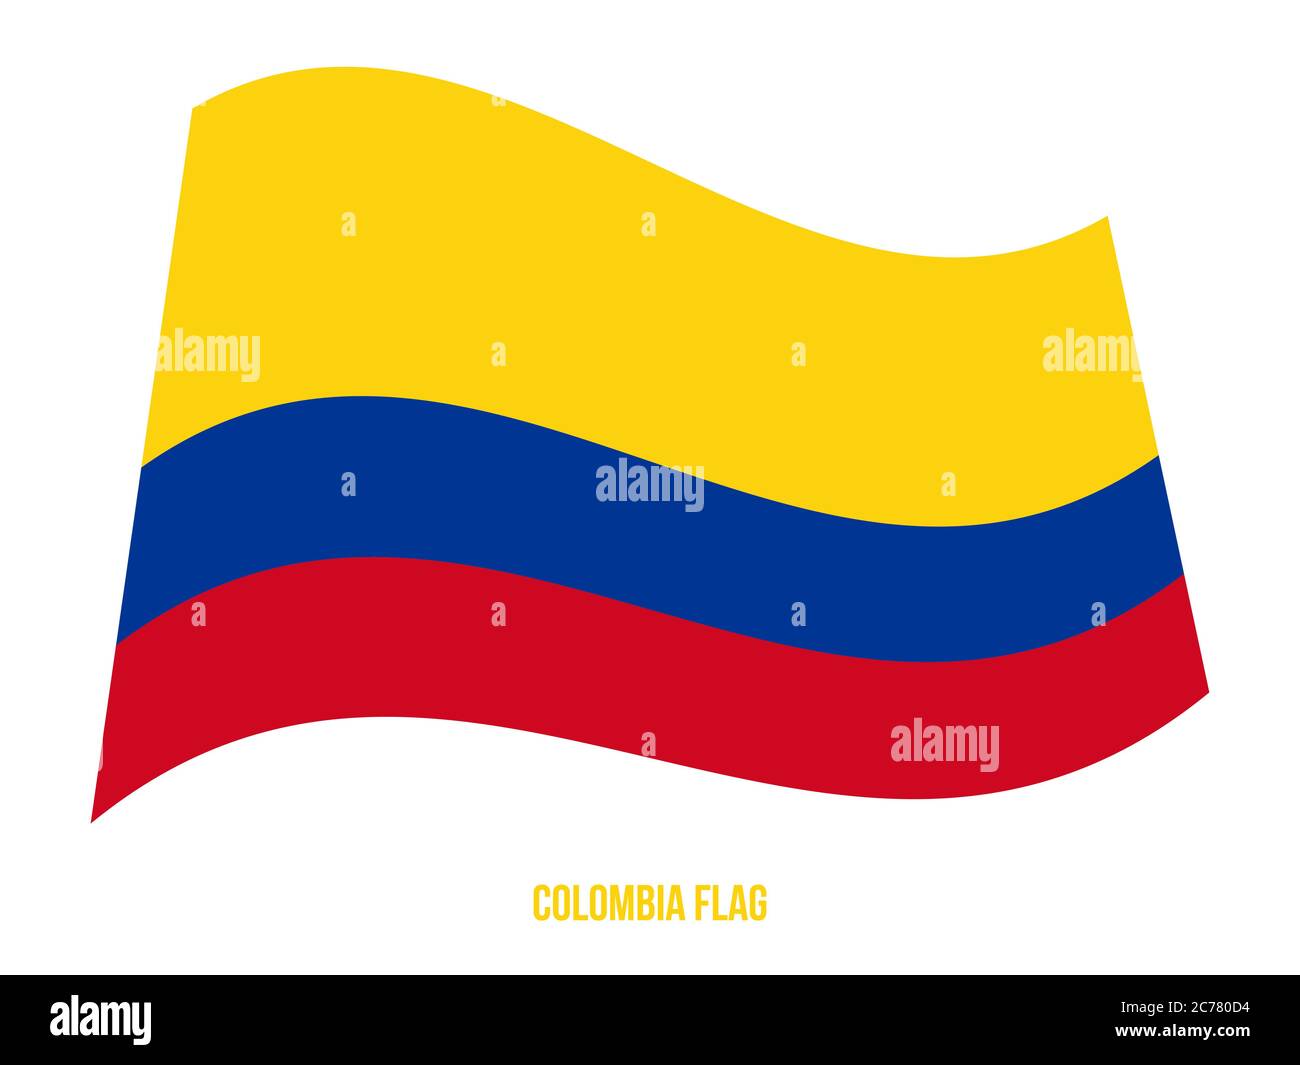 Colombia Flag Waving Vector Illustration on White Background. Colombia National Flag. Stock Vector